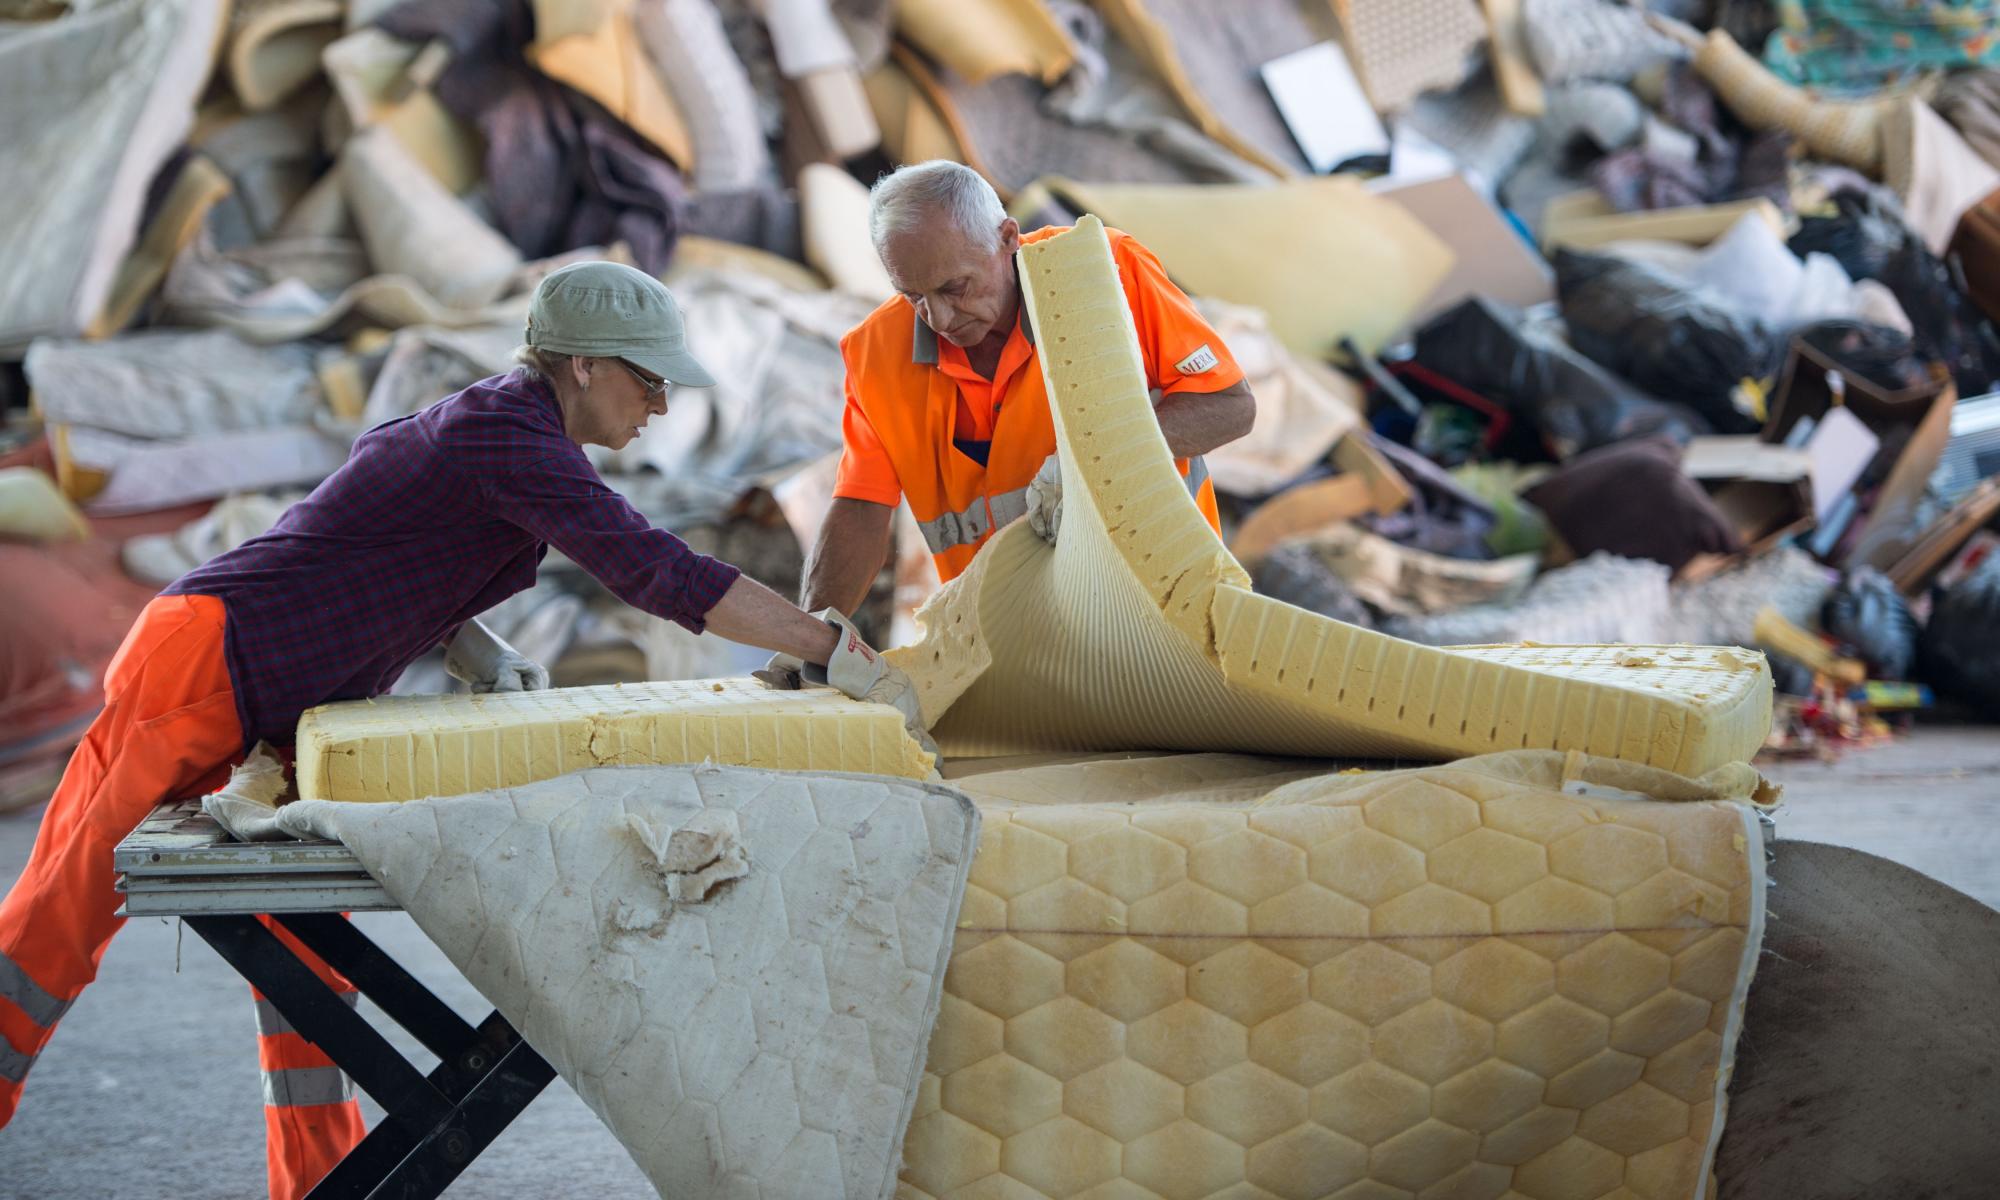 The mattress landfill crisis: how the race to bring us better beds led to a recycling nightmare